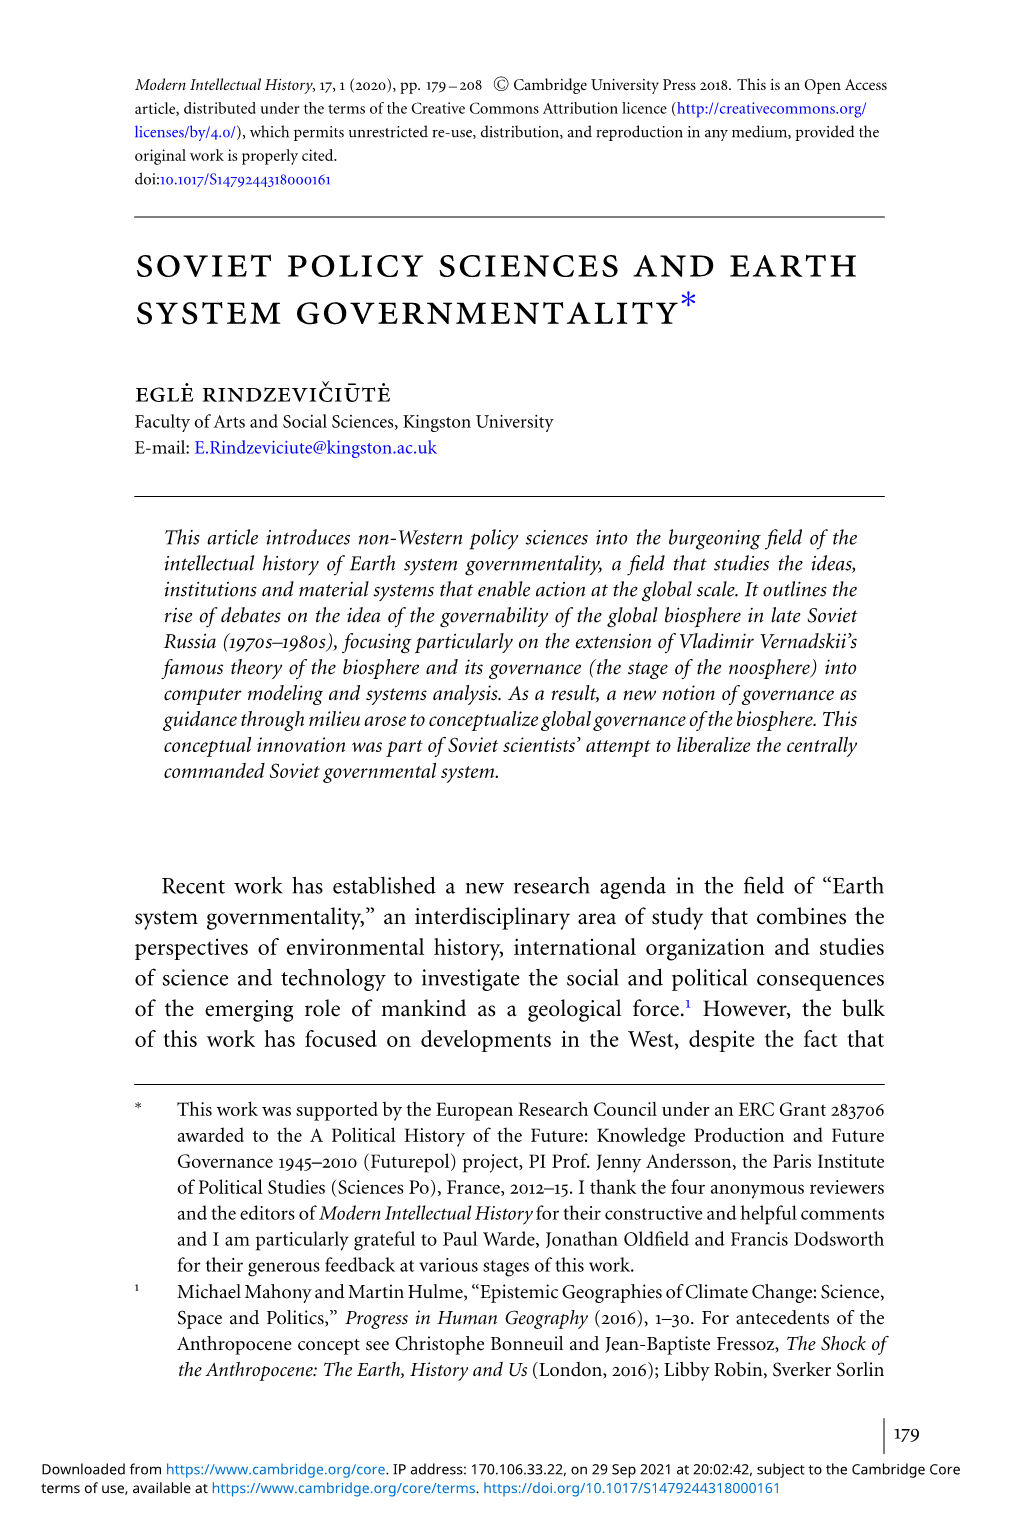 Soviet Policy Sciences and Earth System Governmentality∗